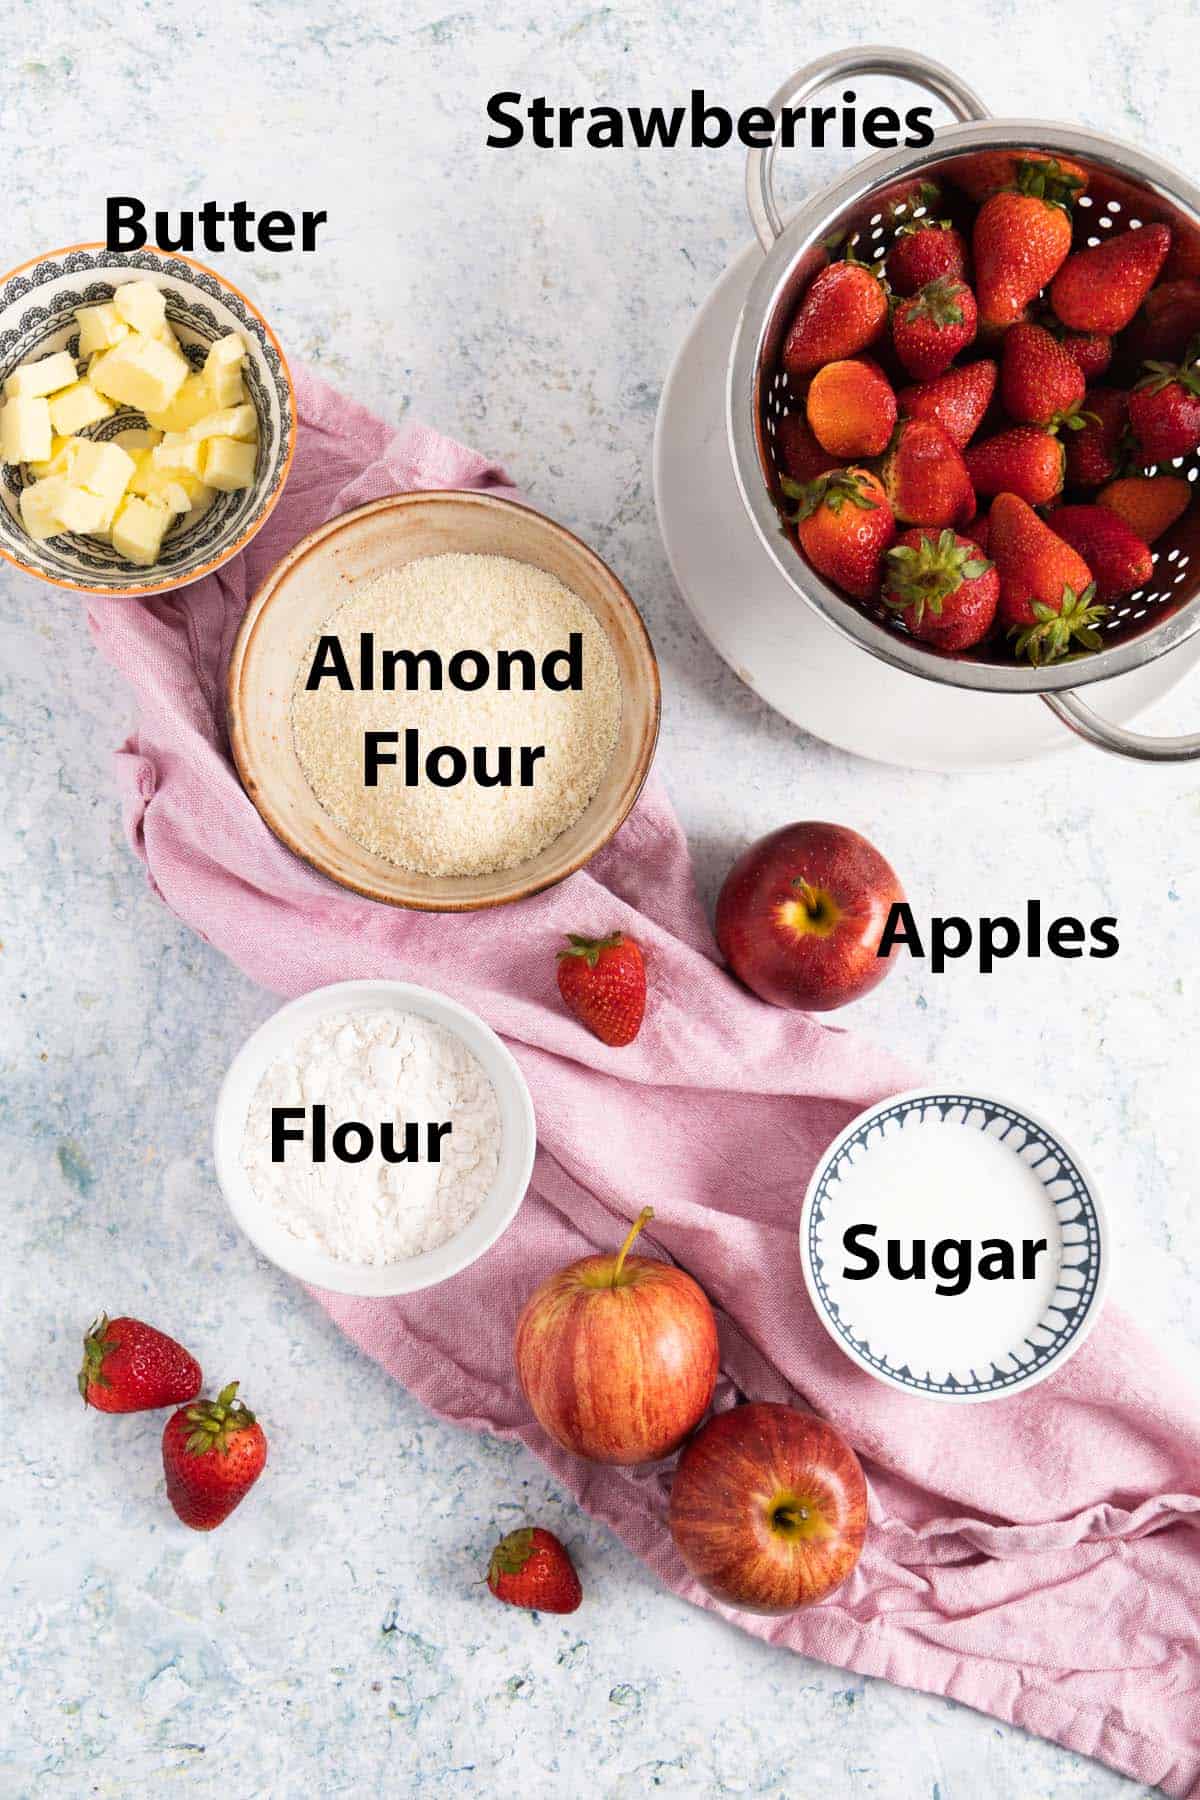 all the ingredients to make apple and strawberry crumble laid out and labelled: butter, strawberry, almond flour, apples, flour, sugar.